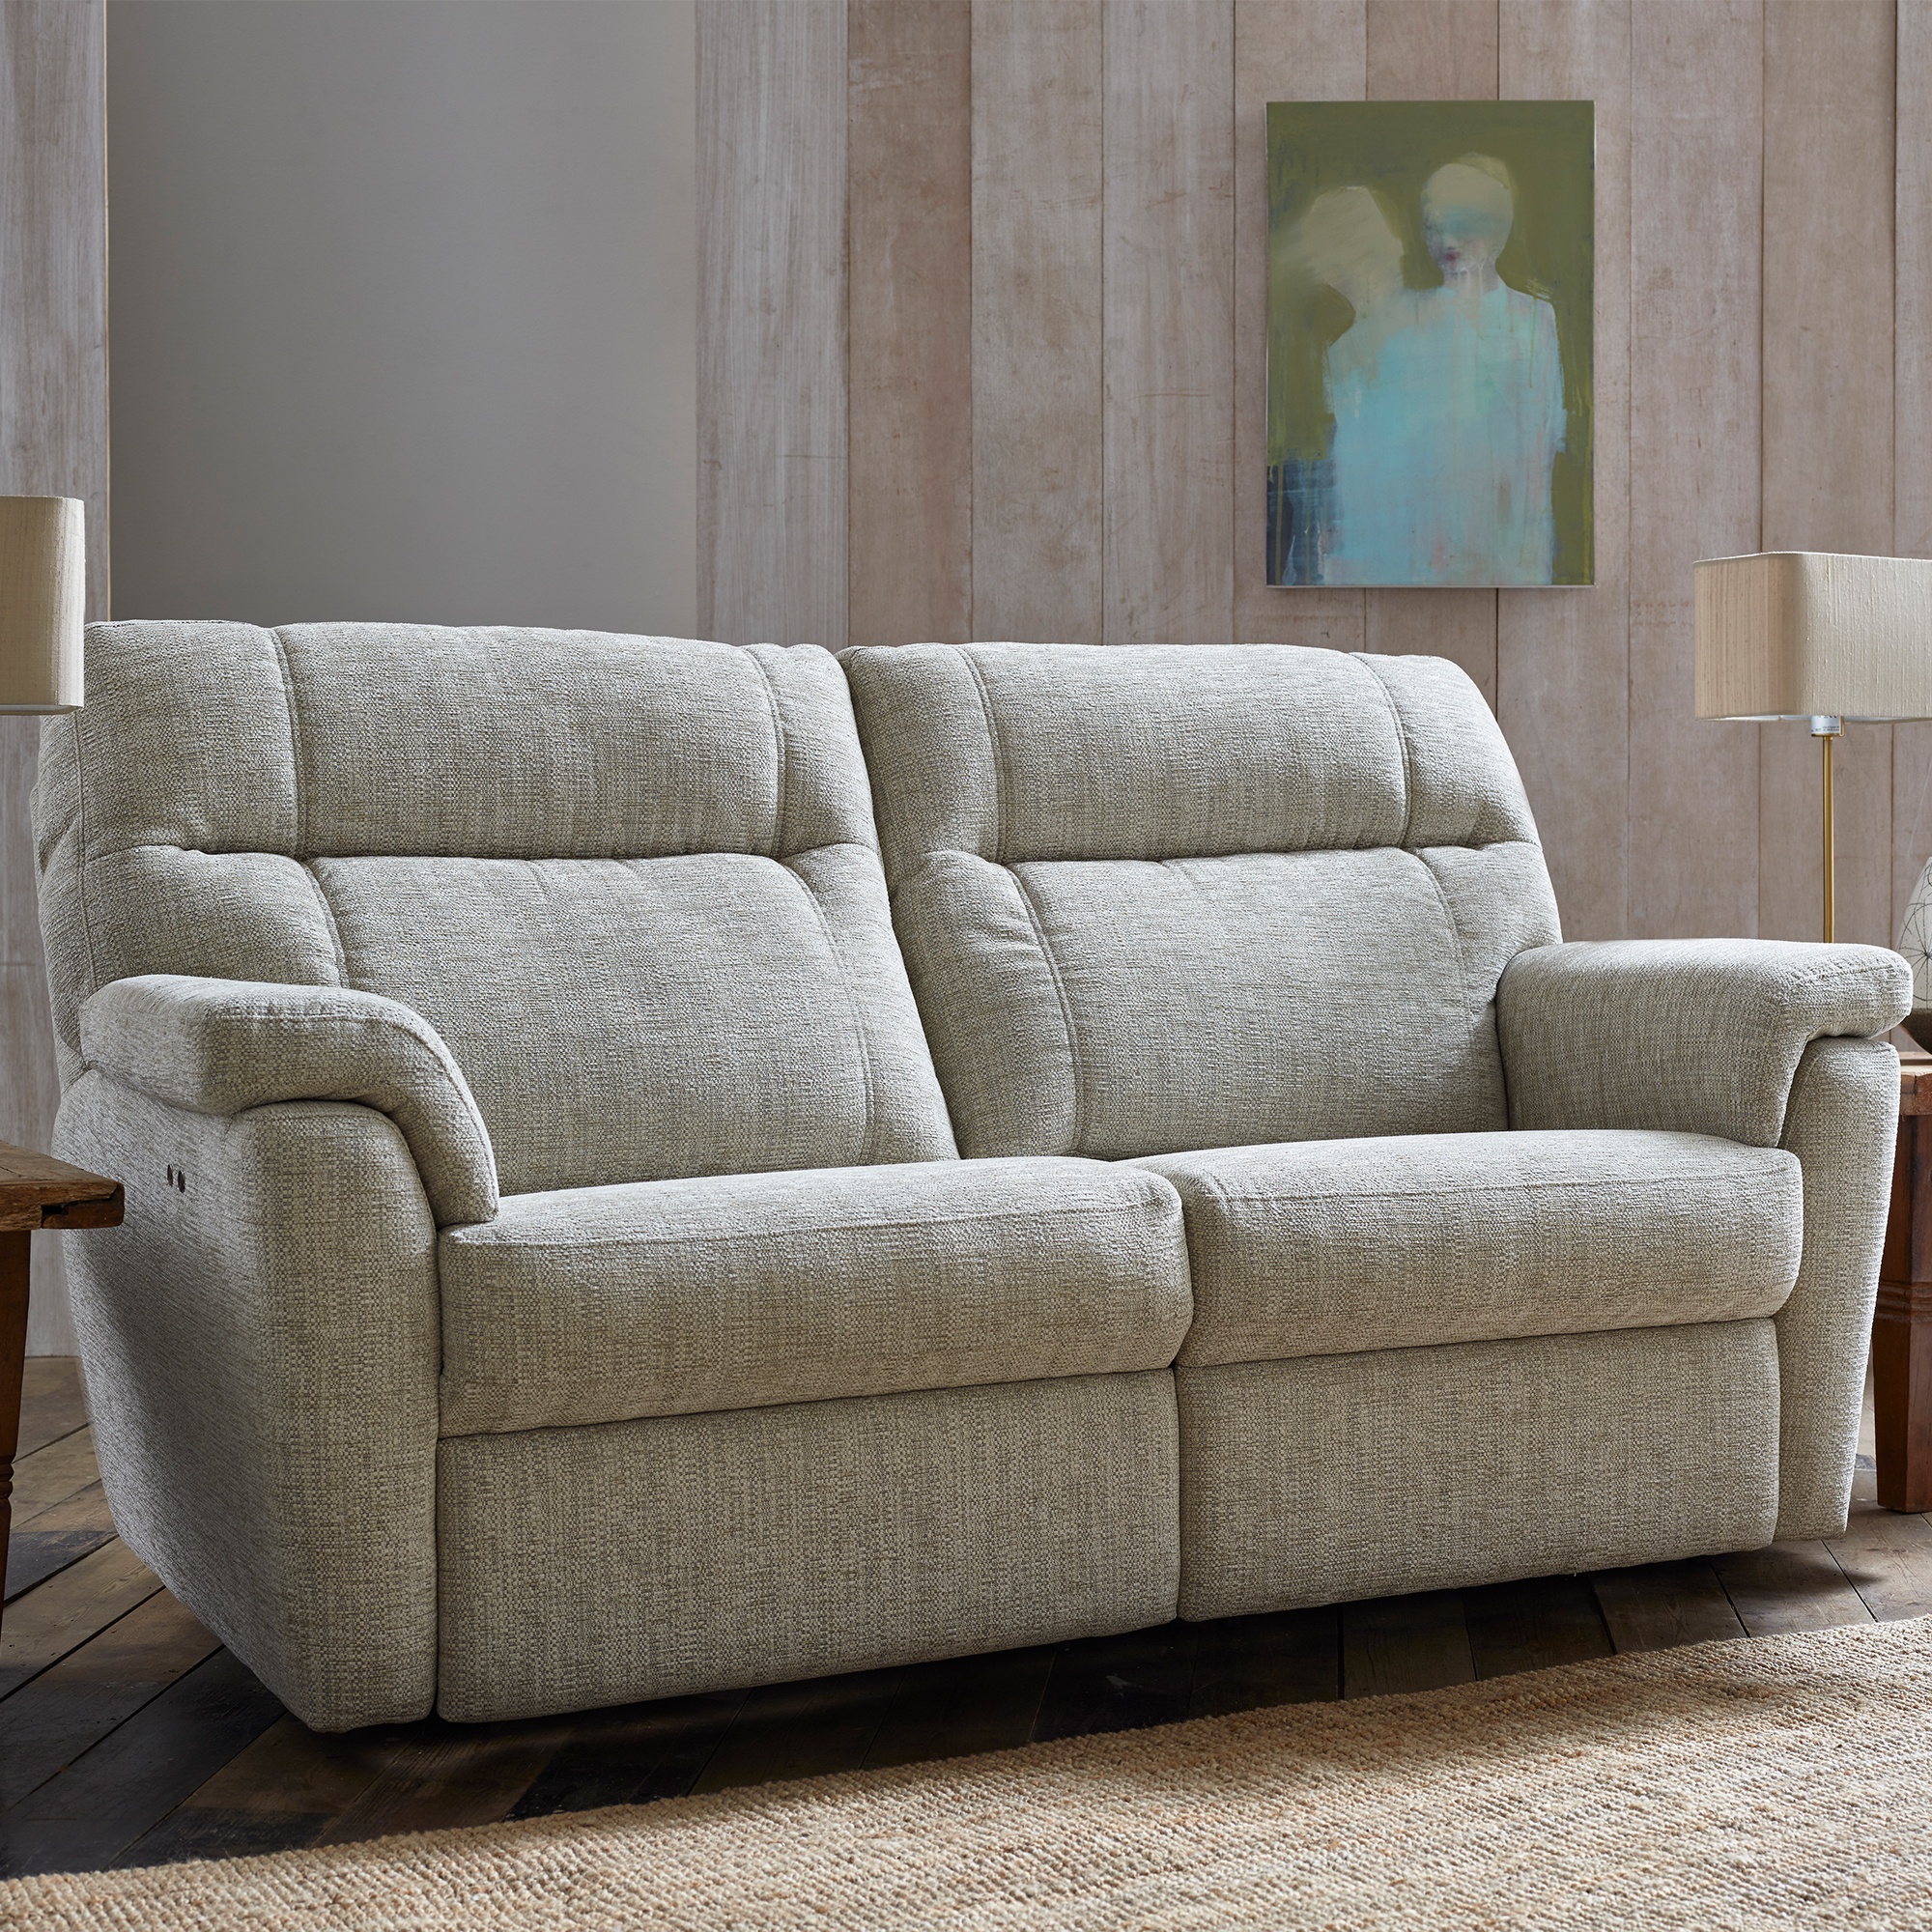 Cookes Collection Lepus 3 Seater Recliner Sofa | All Sofas | Cookes ...